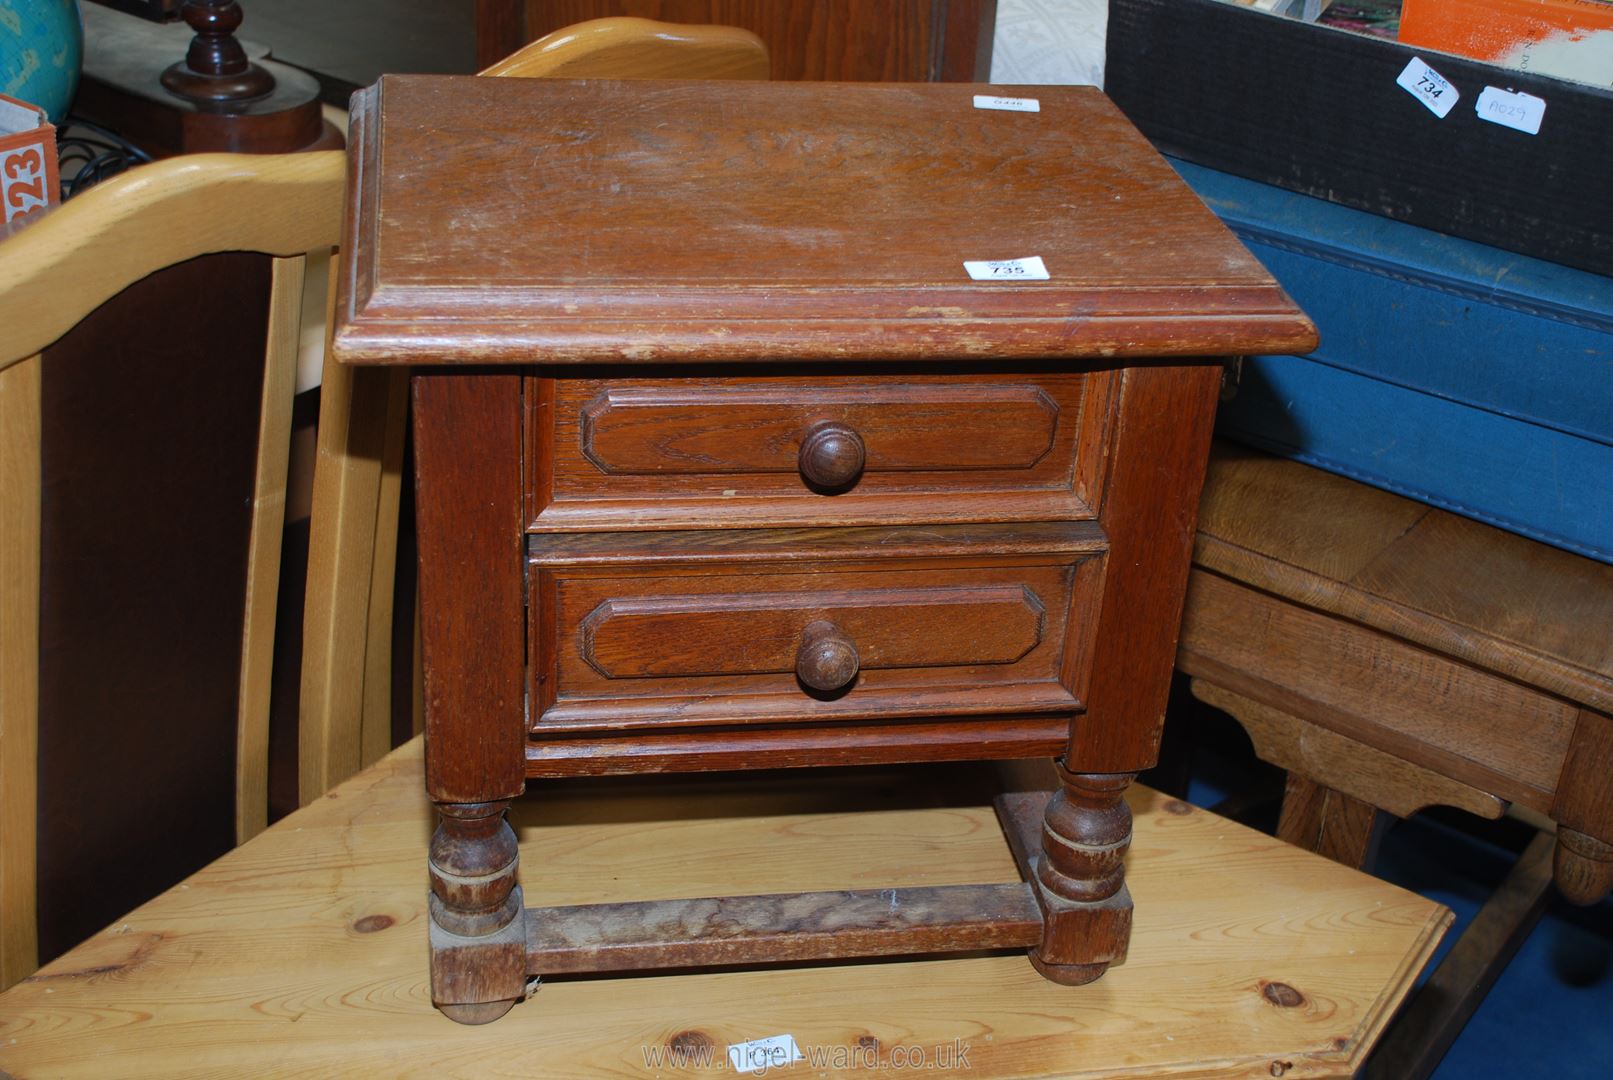 A small cabinet with two drawers, 18" x 14" x 18" high.